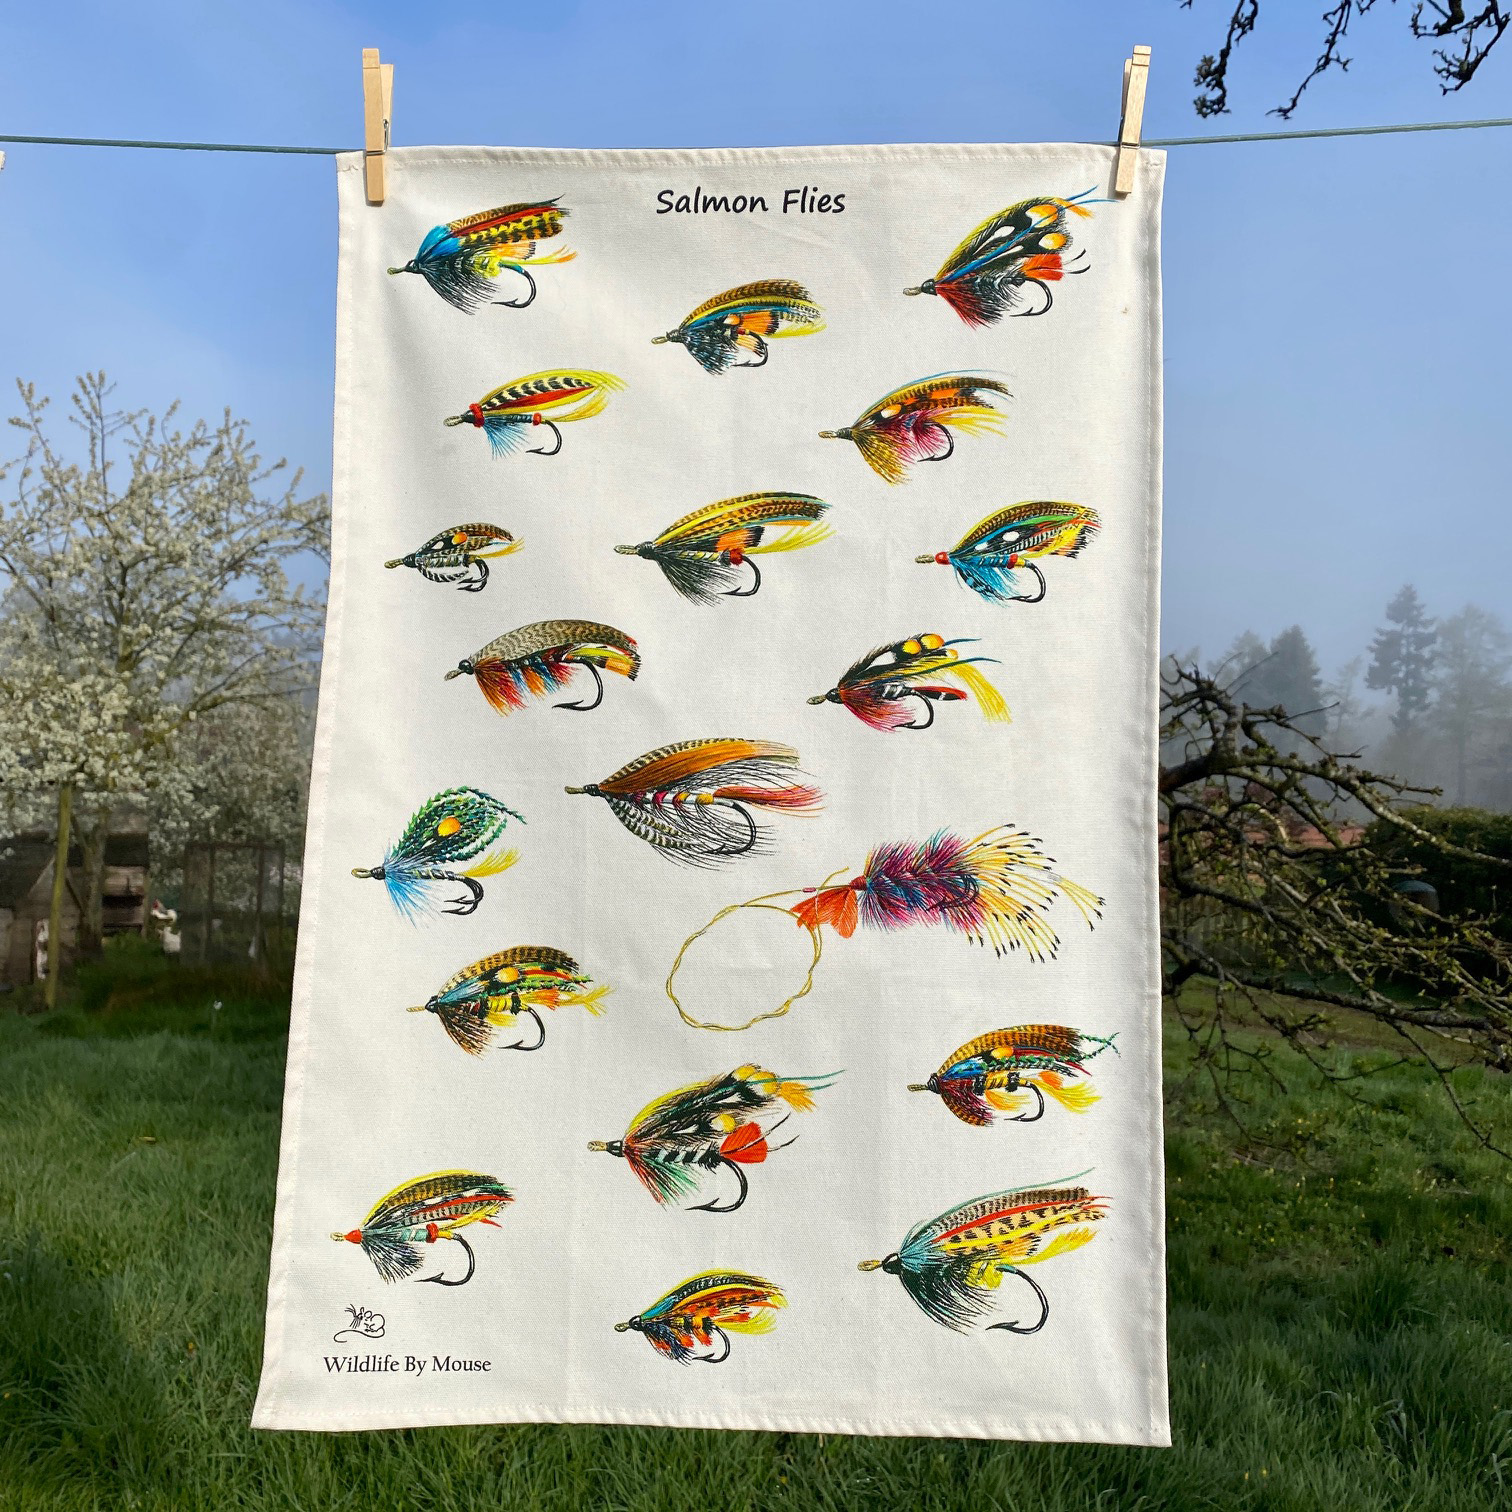 Salmon fly tea towel, salmon fly, salmon flies, sighing flies, tea towel, tea, washing up, drying up. wildlife by mouse, mouse, kitchen, homeware, decoration, household, gift, MM332TT